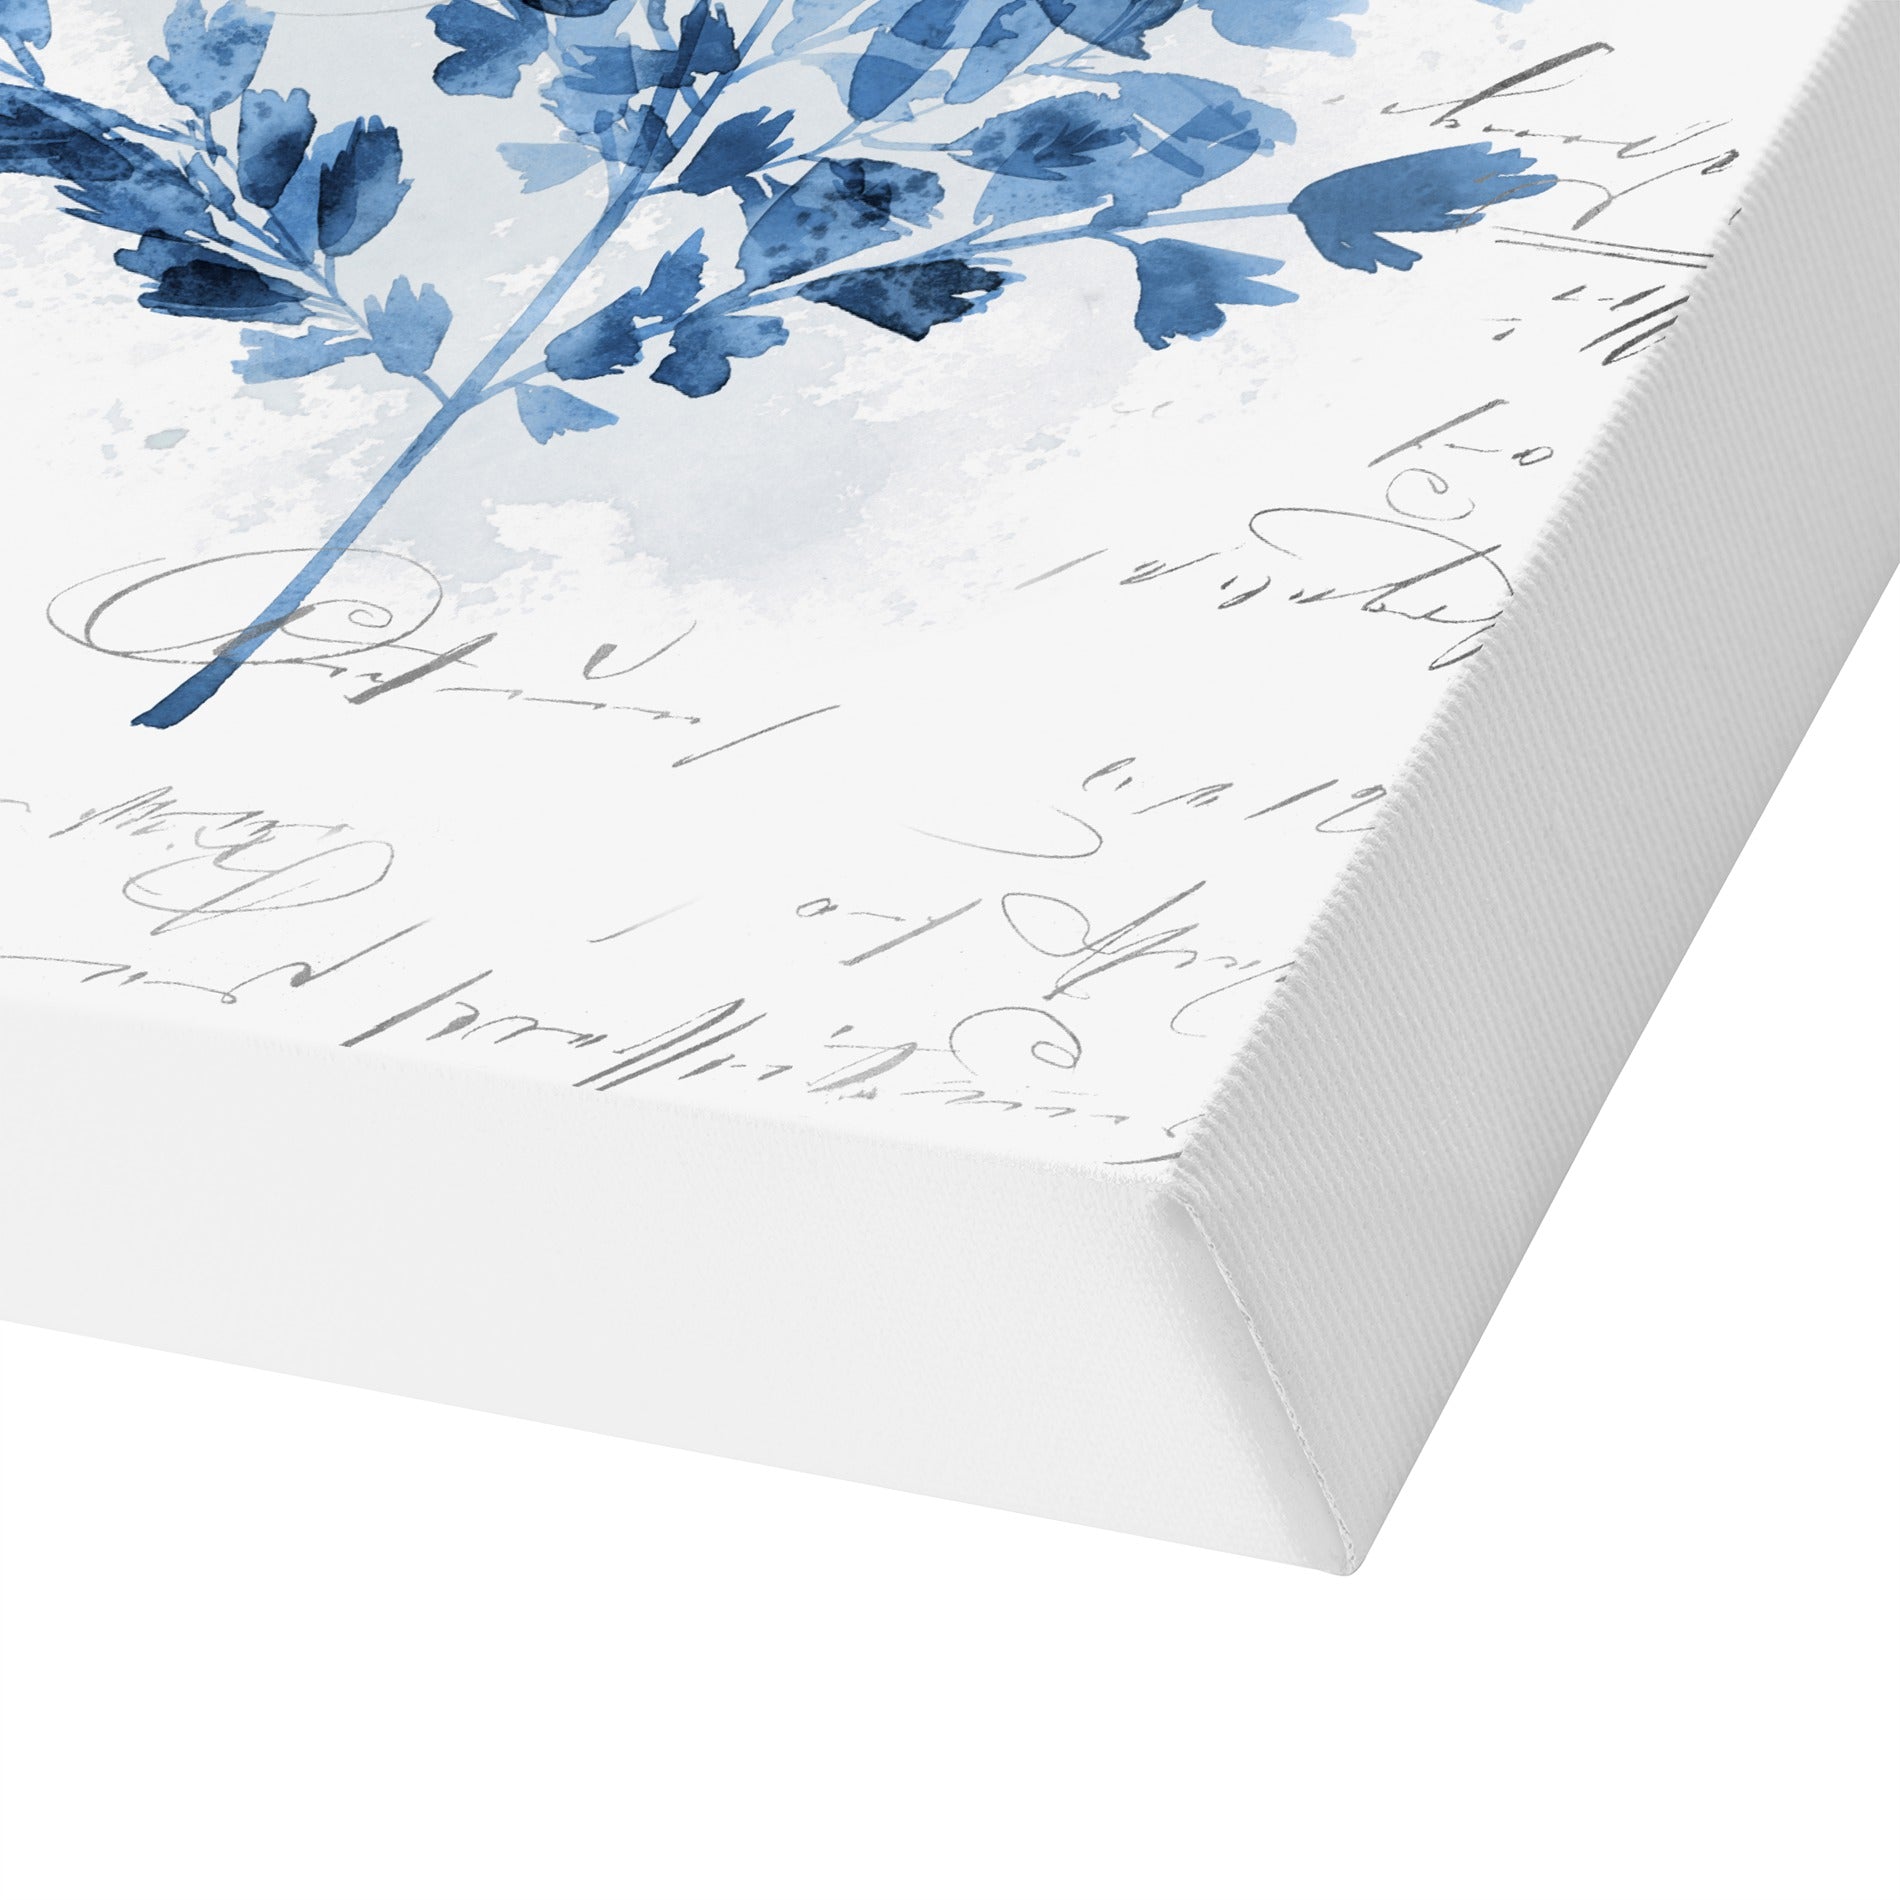 Botanical Blue Iii by PI Creative Art - Wrapped Canvas - Americanflat